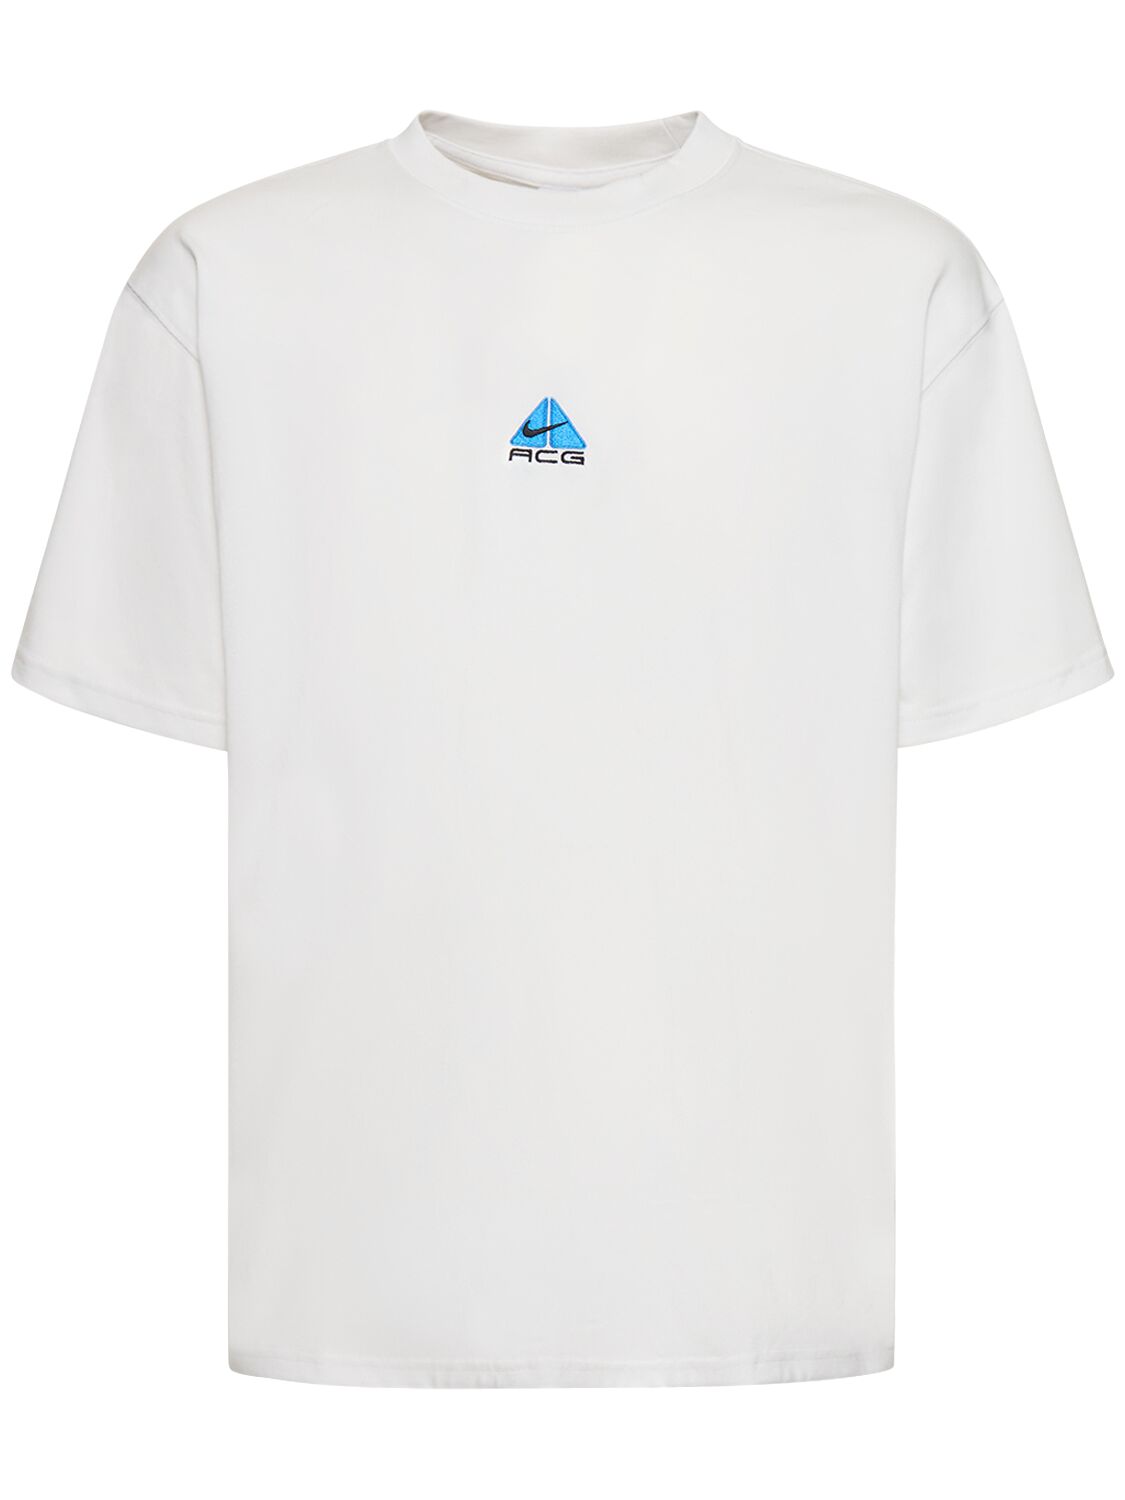 Image of Acg Lungs Cotton Blend T-shirt